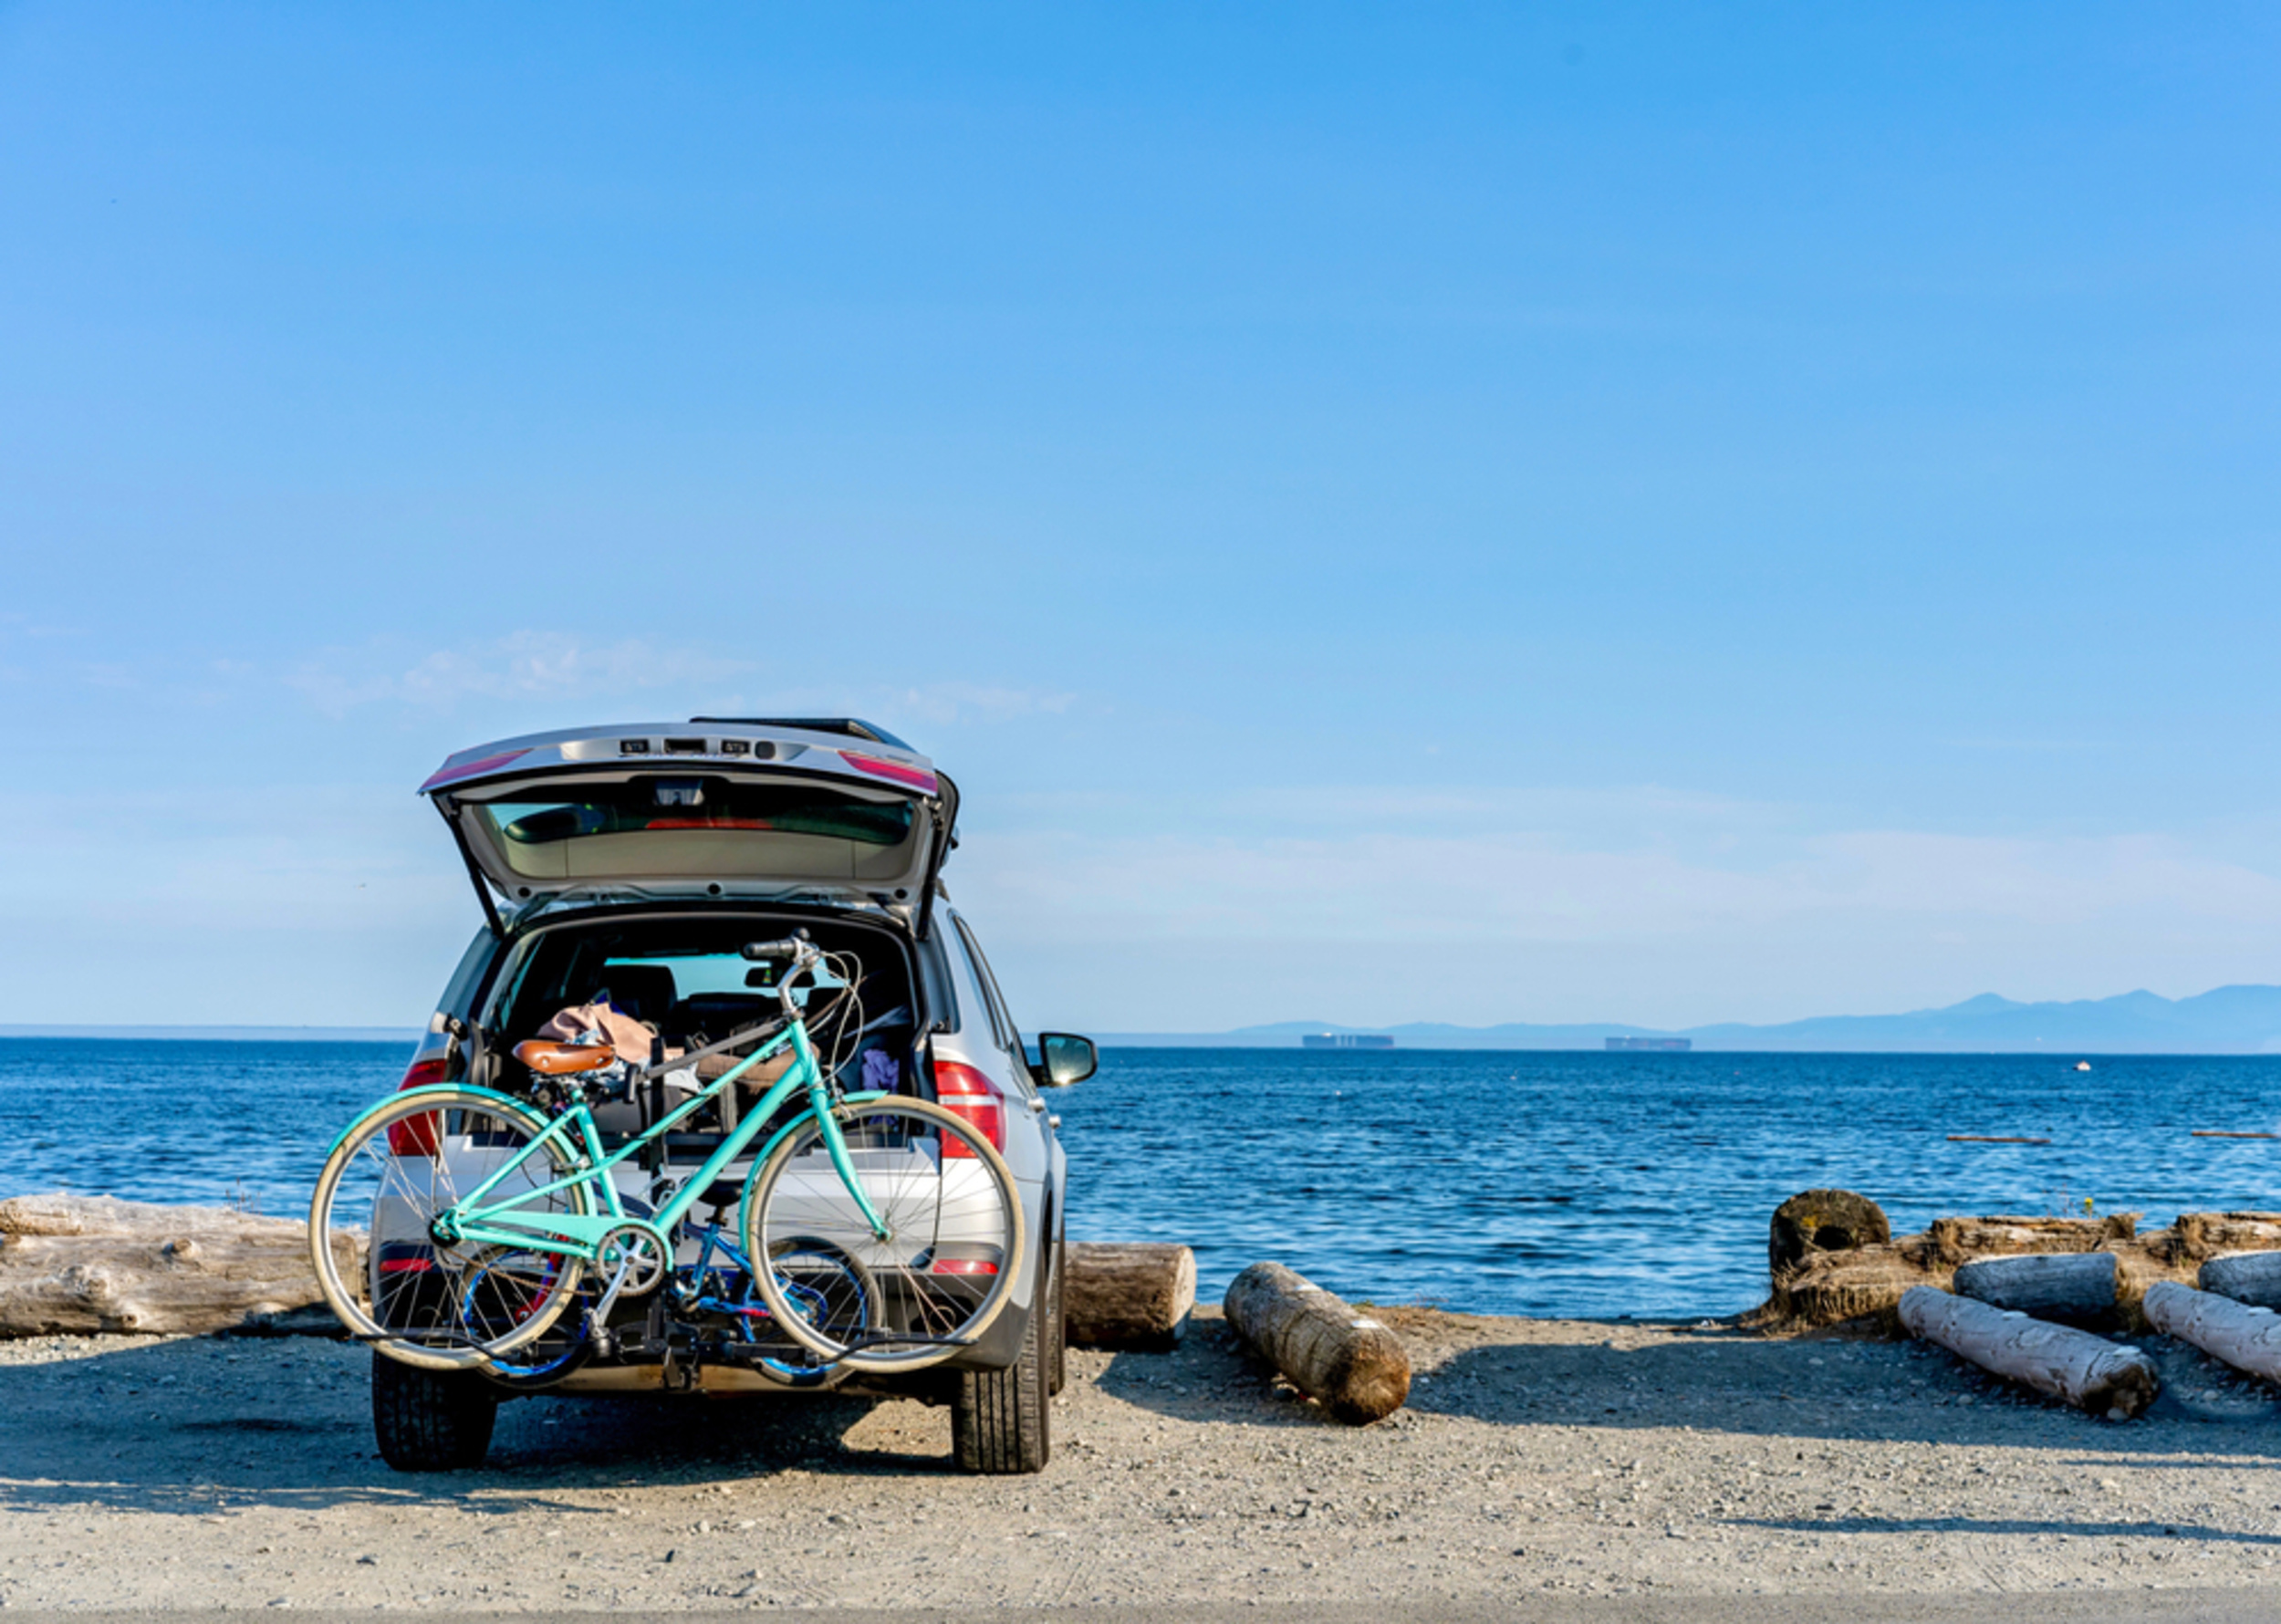 <p>Even if your road trip is only a few hours long, it's still nice to get out and stretch your legs every once in a while. Search along your route for rest stops, fun roadside attractions, and other activities that can offer a short break from the monotony of driving. </p><p><a href='https://www.msn.com/en-us/community/channel/vid-cj9pqbr0vn9in2b6ddcd8sfgpfq6x6utp44fssrv6mc2gtybw0us'>Follow us on MSN to see more of our exclusive lifestyle content.</a></p>